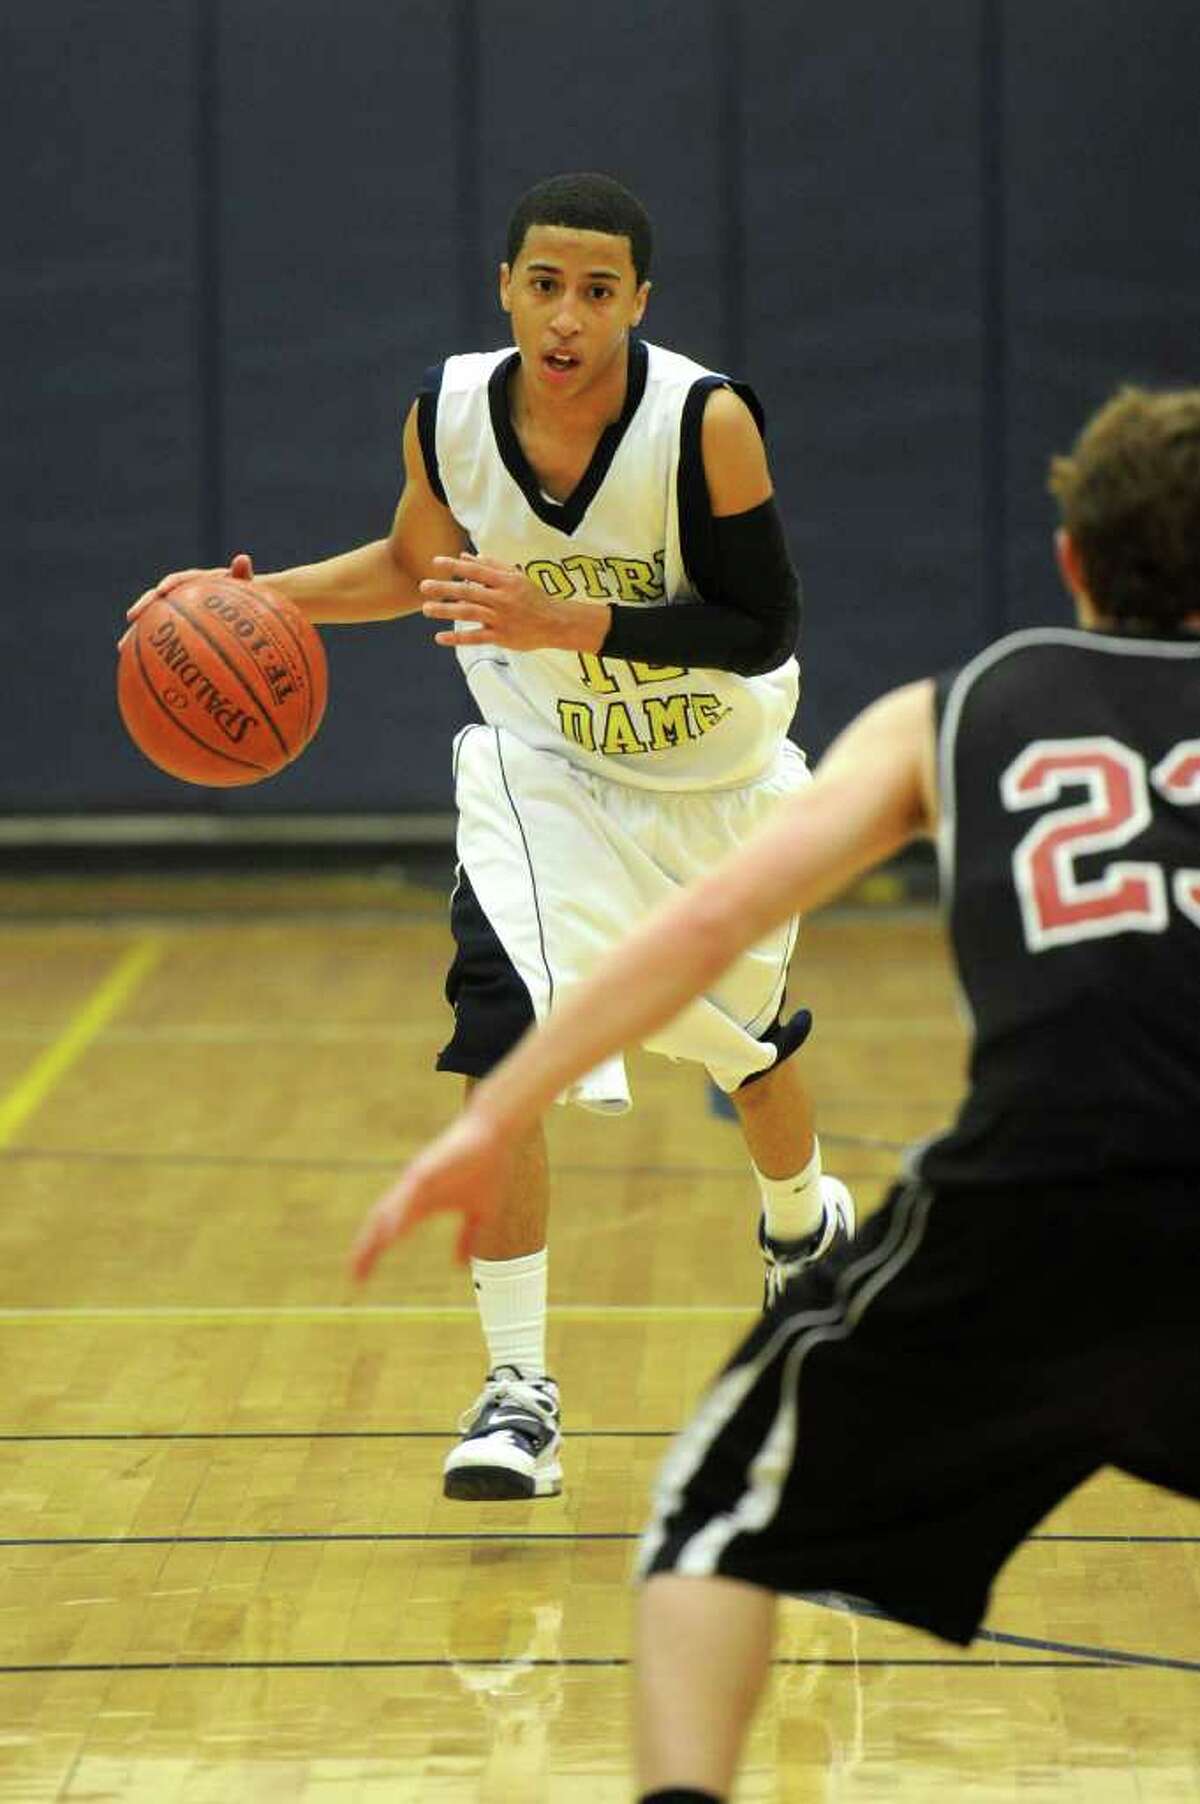 Notre Dame's Tre McPhersin dribbles during Thursday's SWC boys basketball final at Weston High School on March 3, 2011.